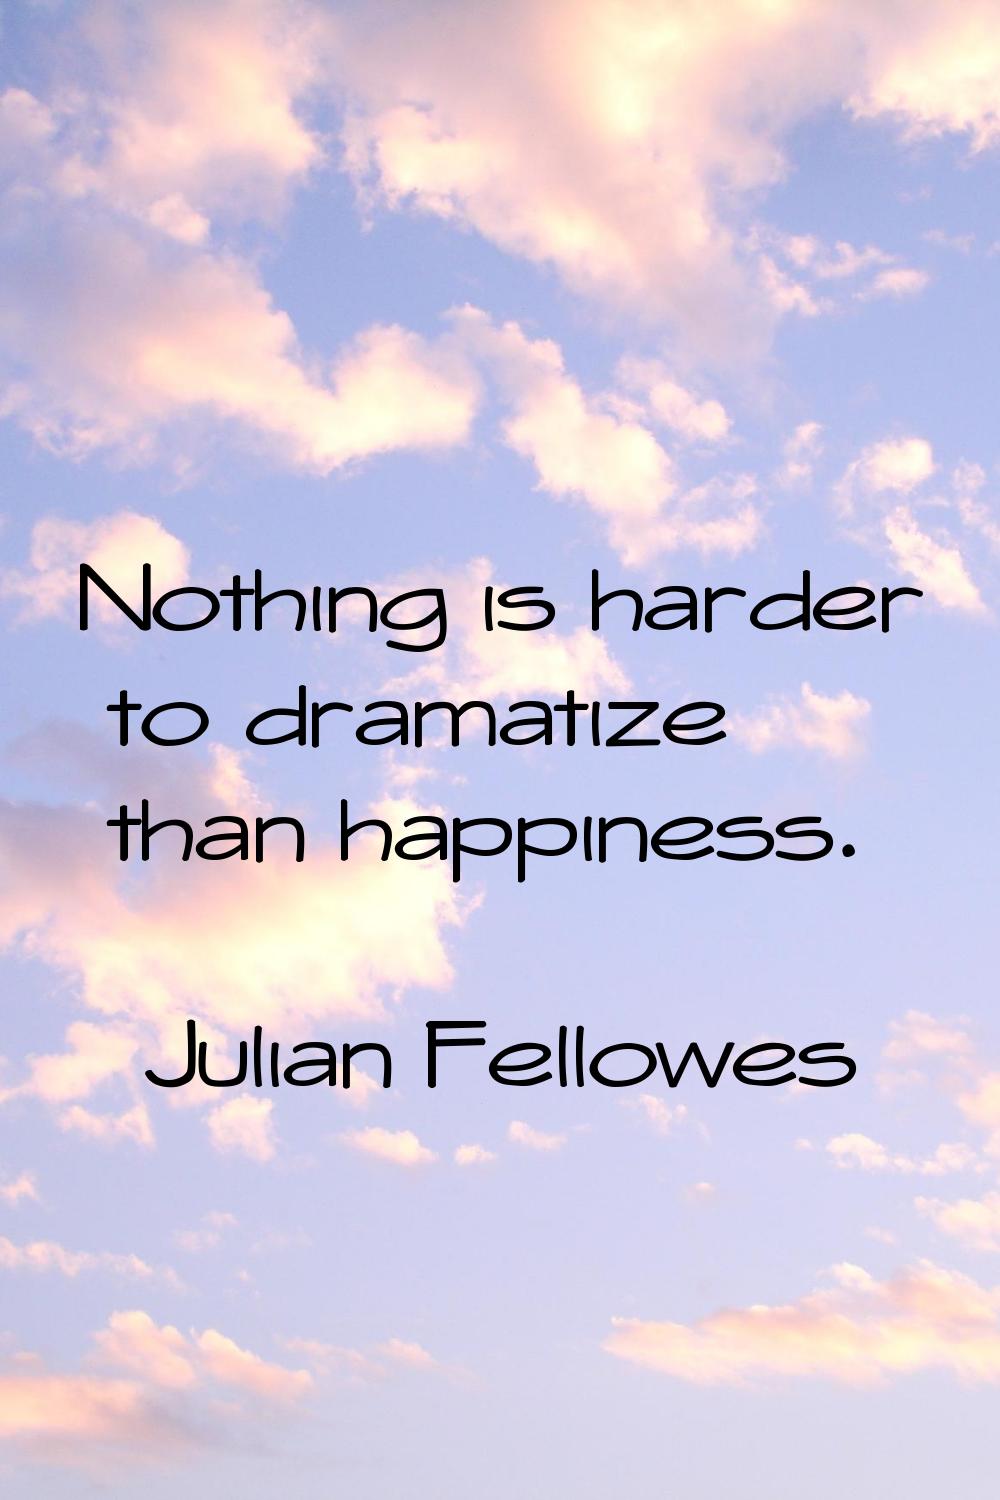 Nothing is harder to dramatize than happiness.